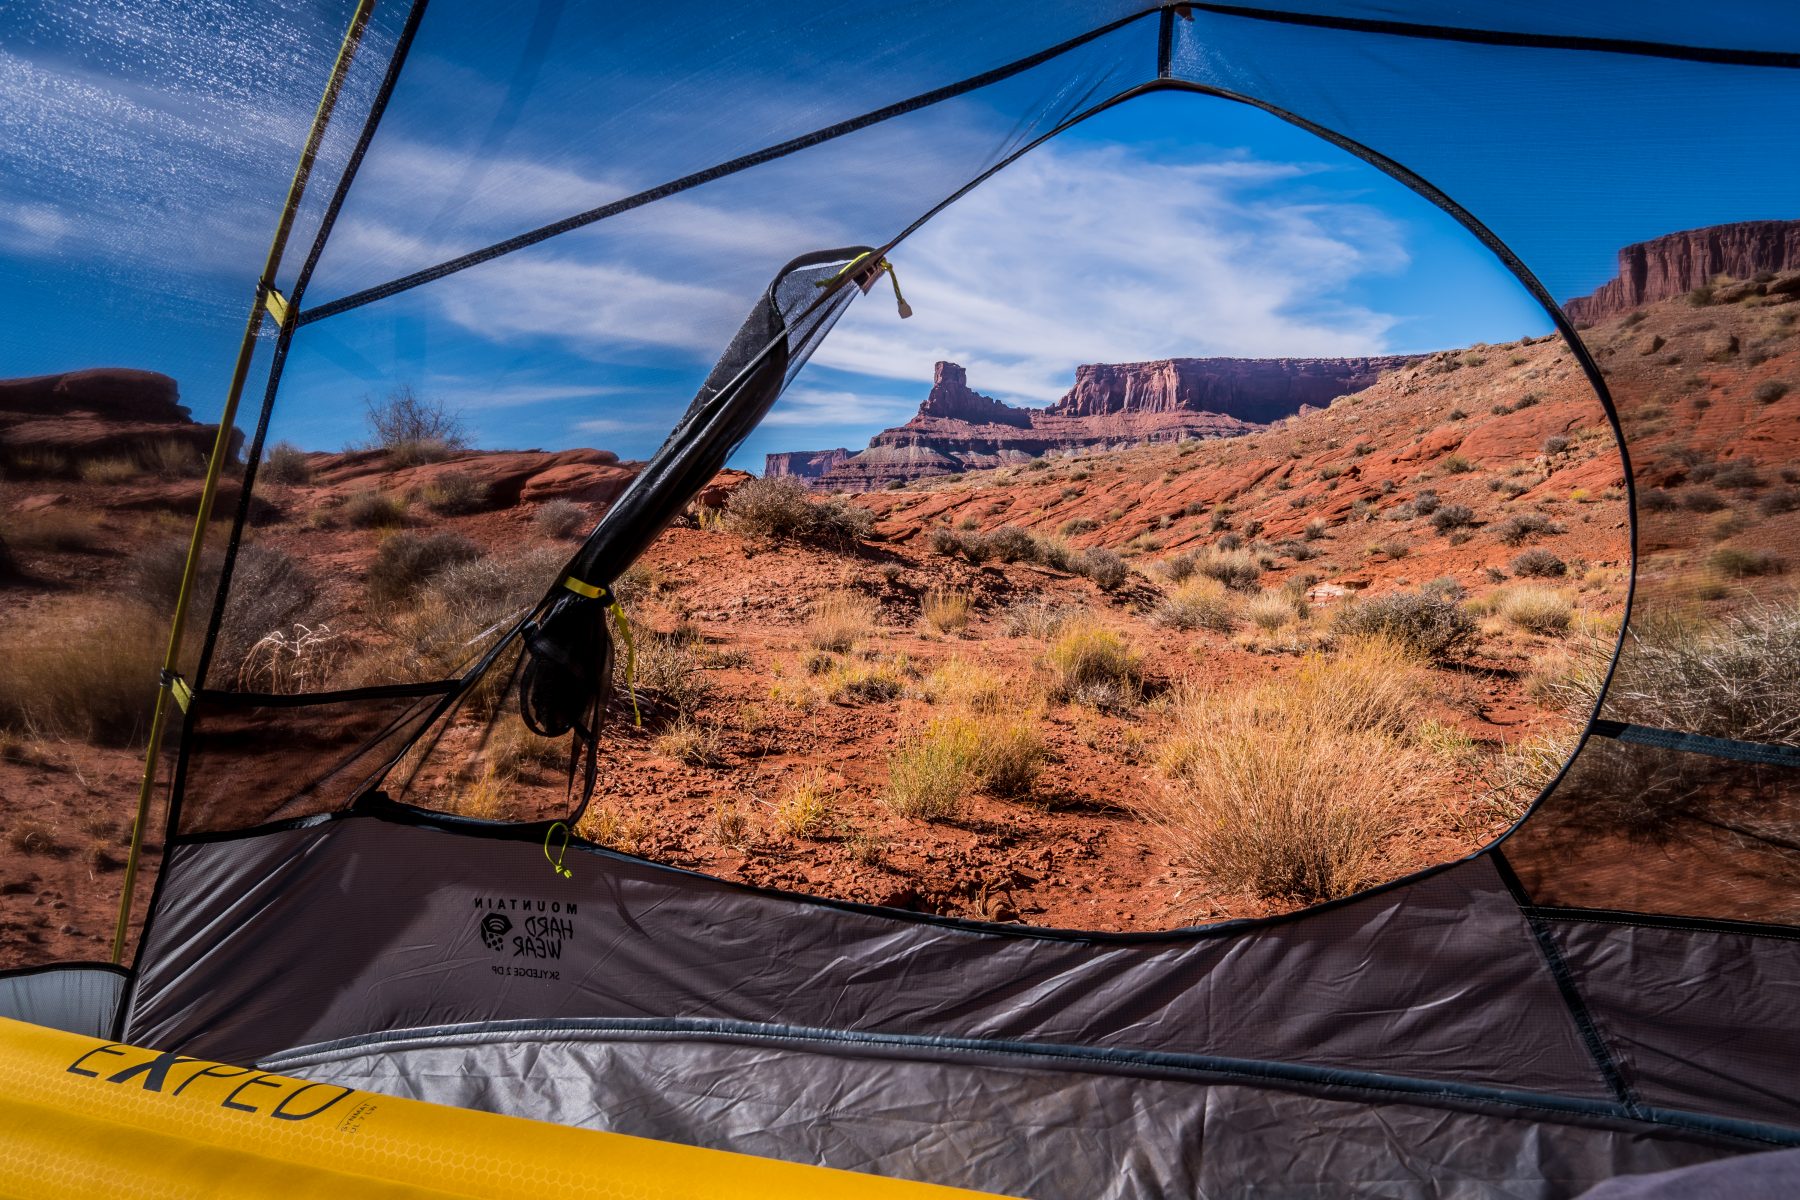 My campsite on BLM land outside Canyonlands National Park